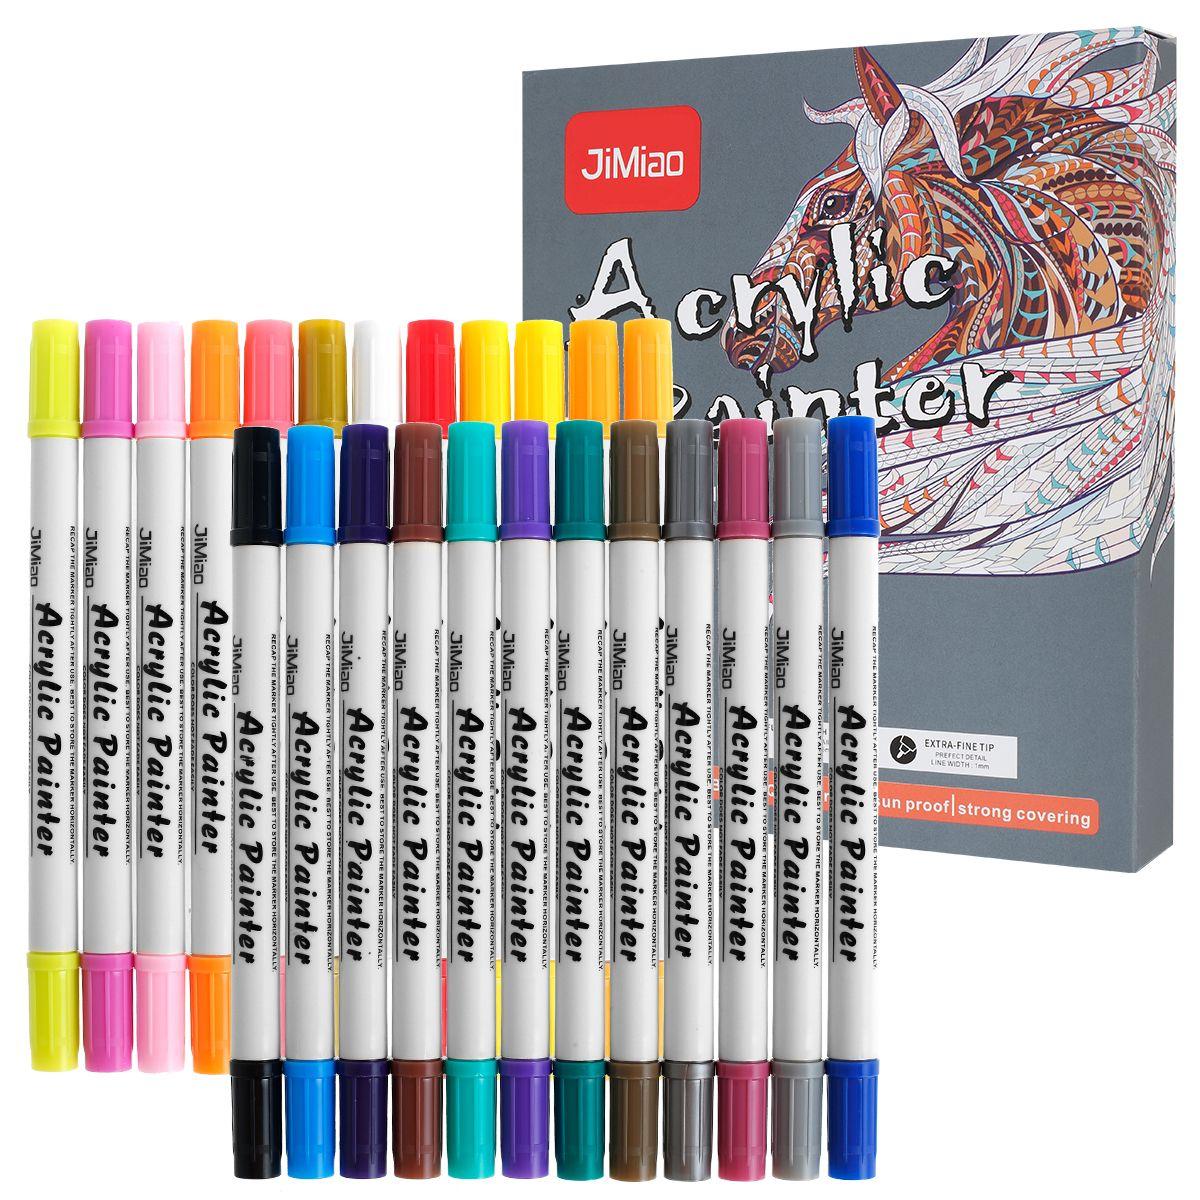 Pack 2 stylos aquadoodle pointe fine